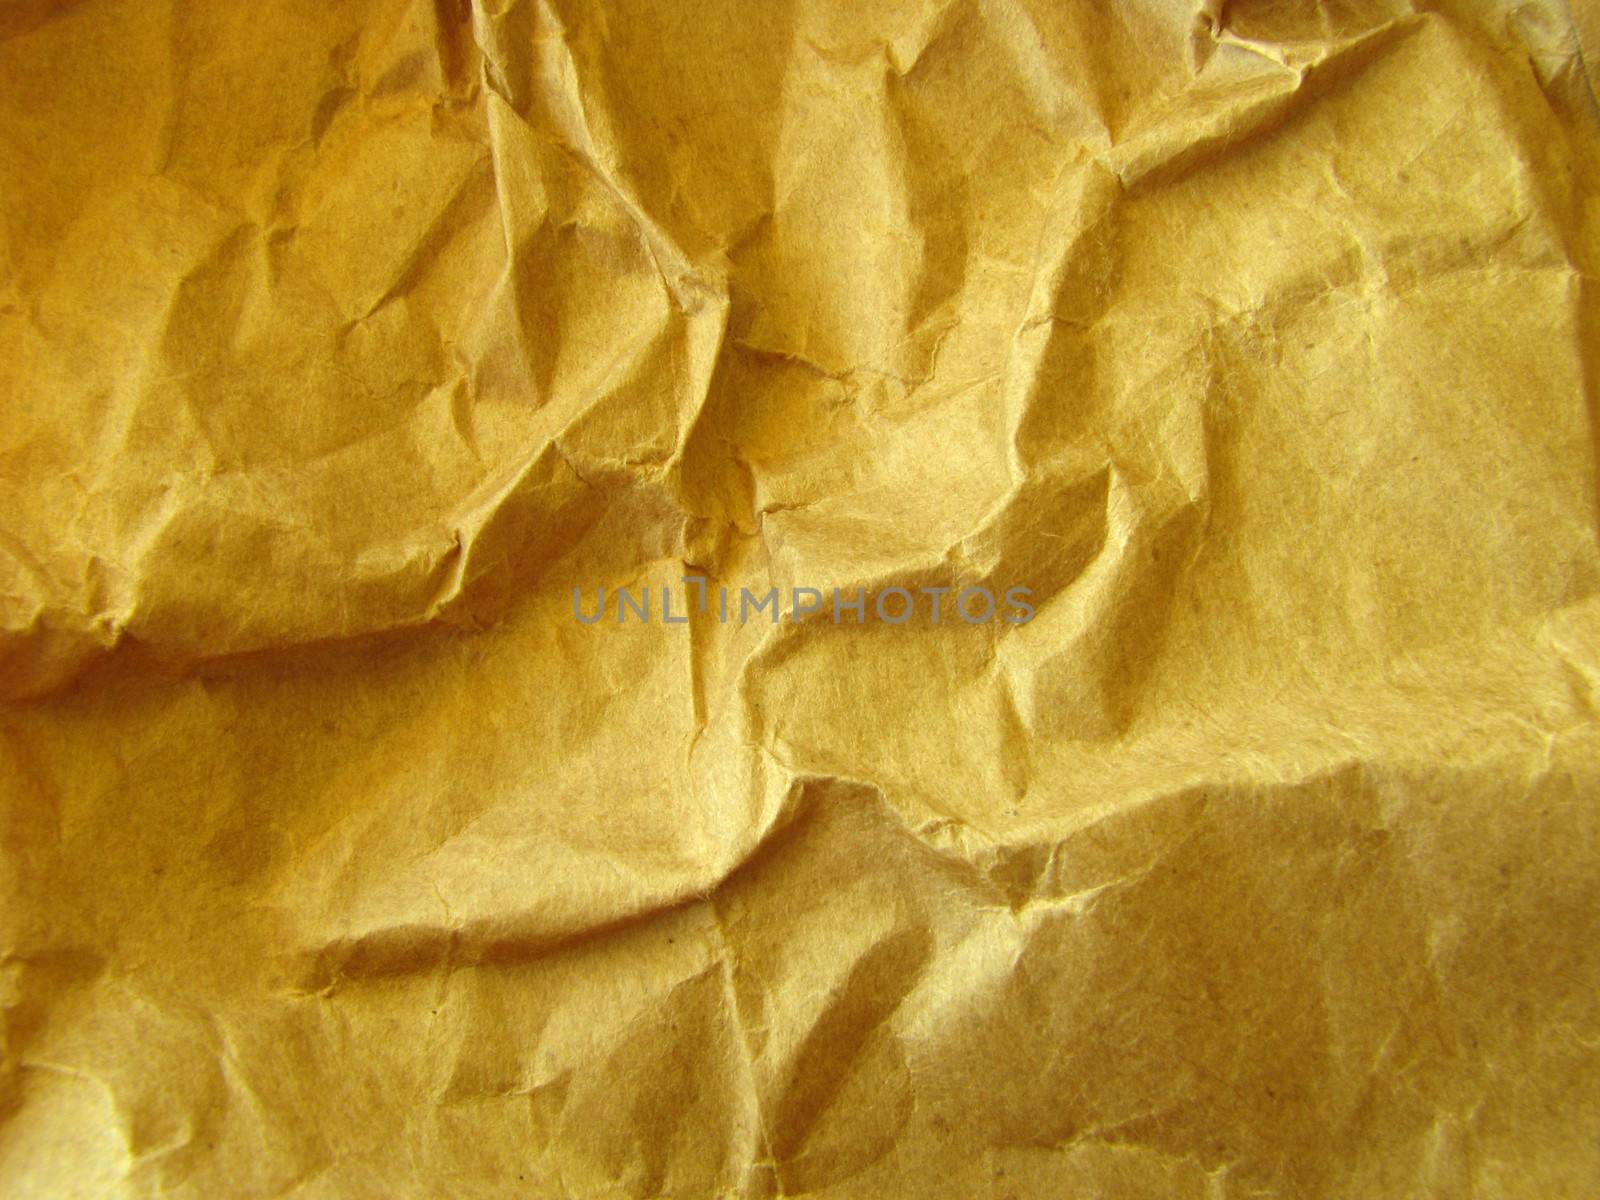 A background image of some crumpled packing paper